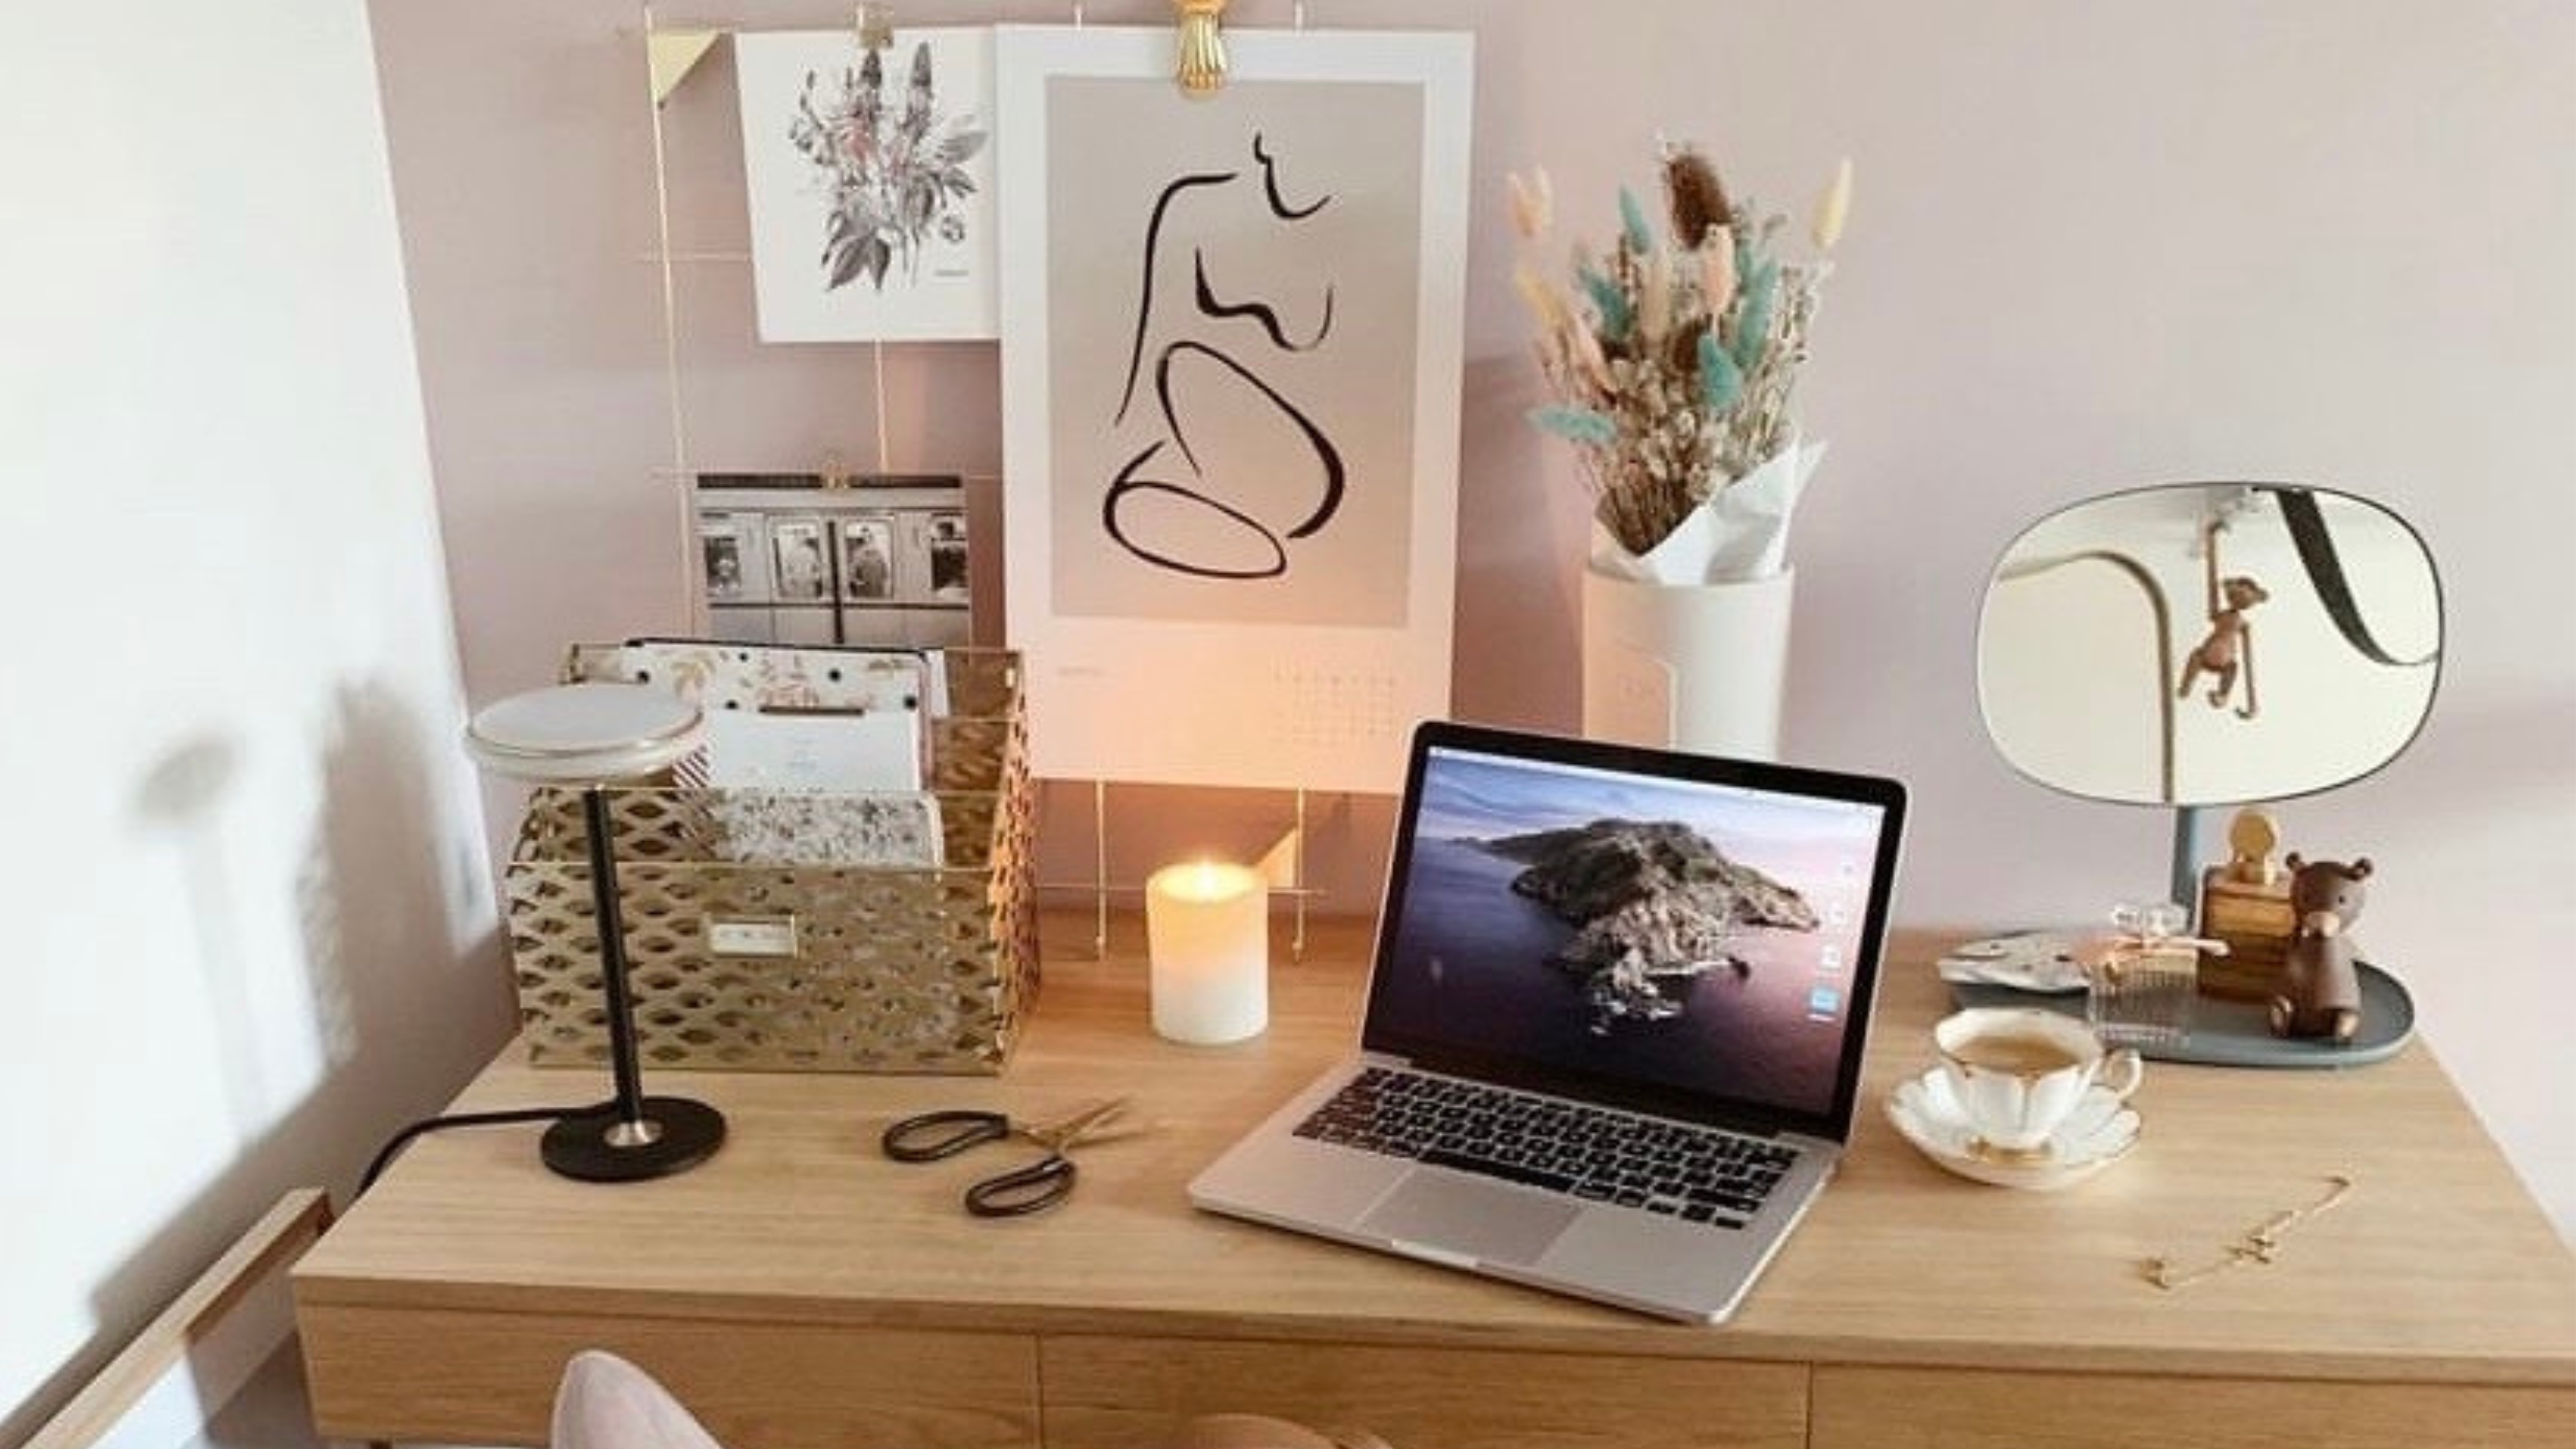 Home Office Tour // Desk Inspo, Study Essentials, and Notes